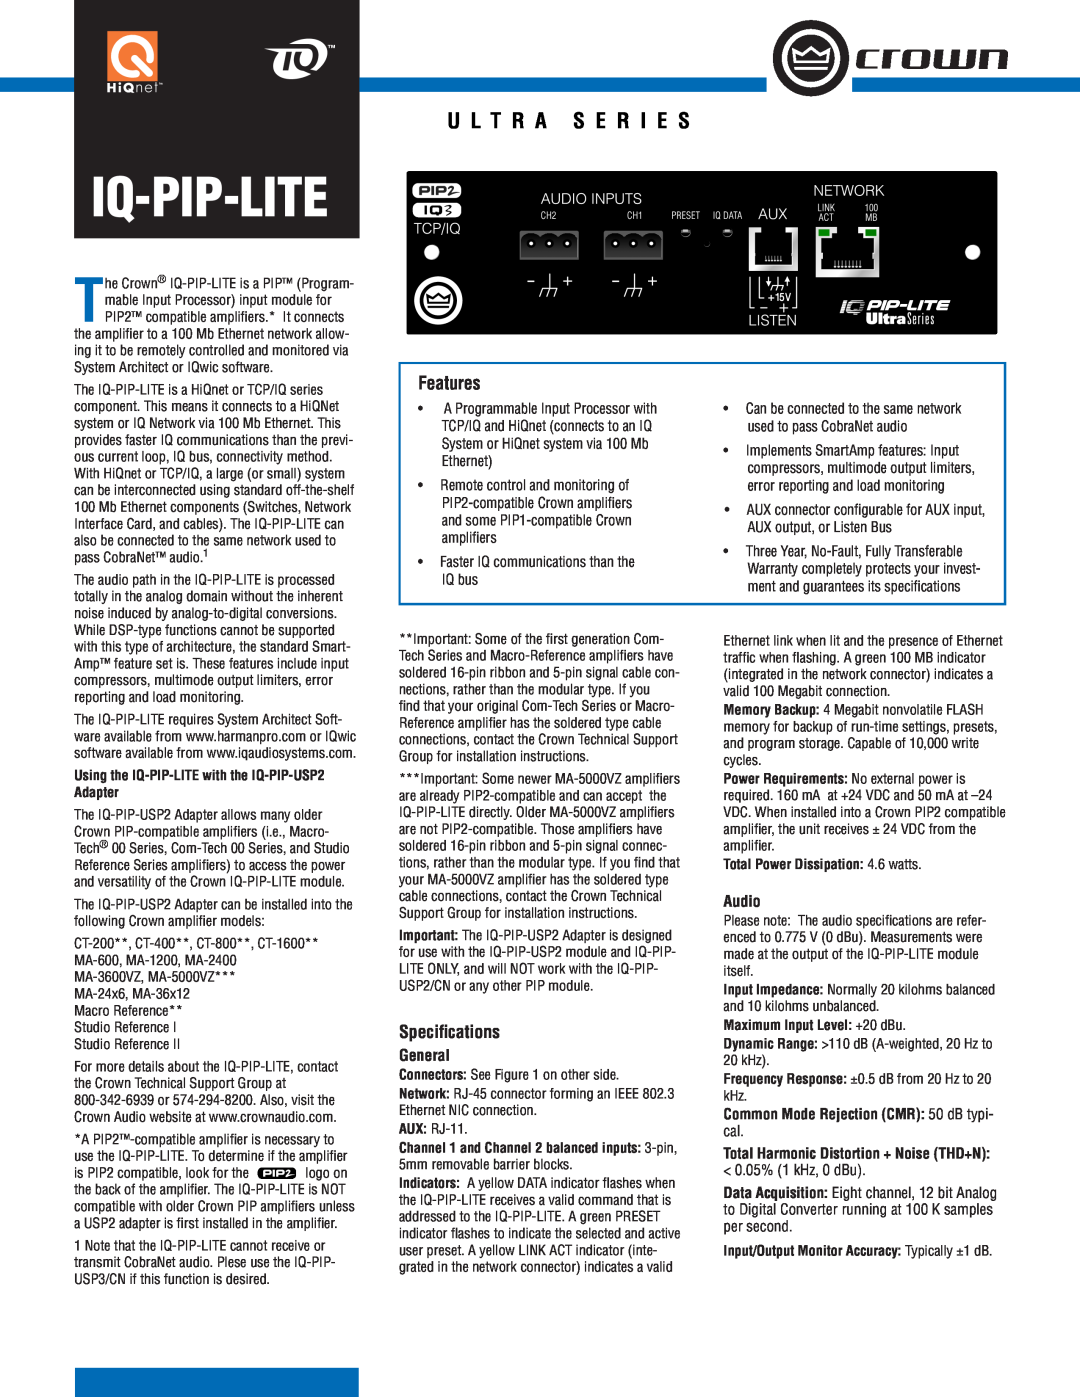 Crown Audio IQ-PIP-LITE specifications Iq-Pip-Lite, Features, Speciﬁcations, Total Power Dissipation 4.6 watts, General 